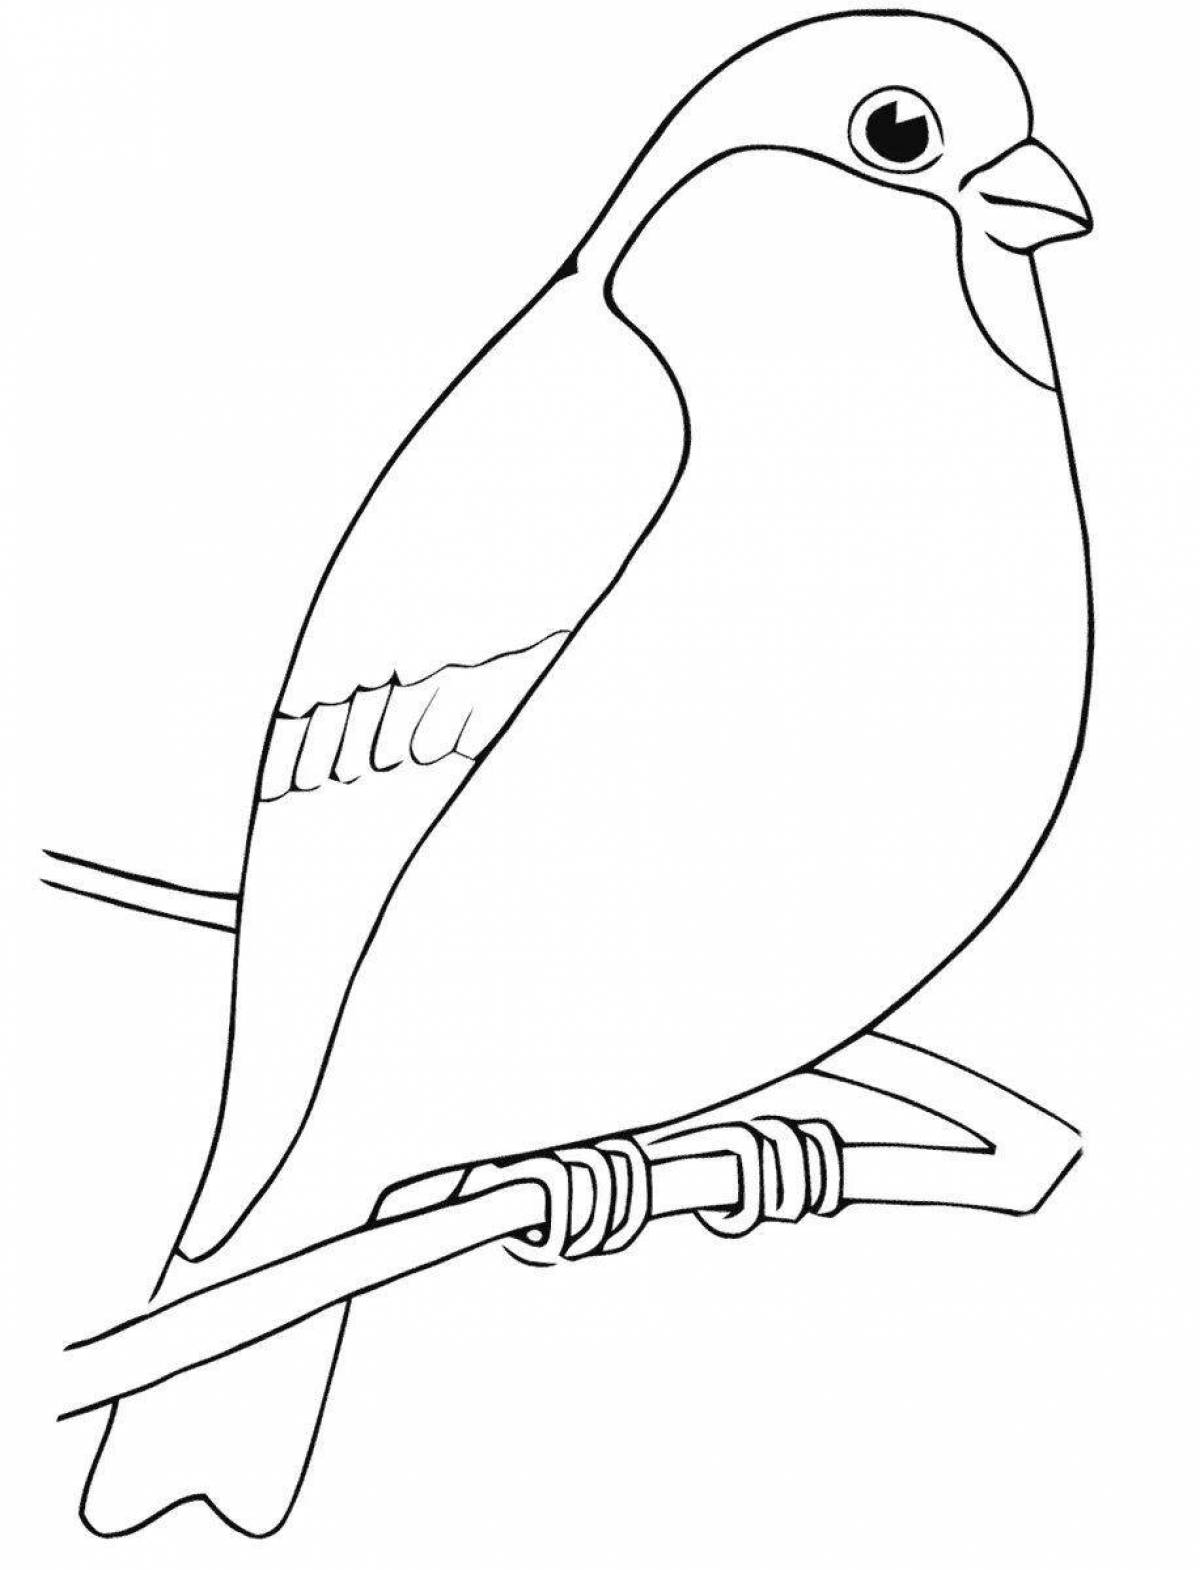 Adorable bullfinch picture for kids